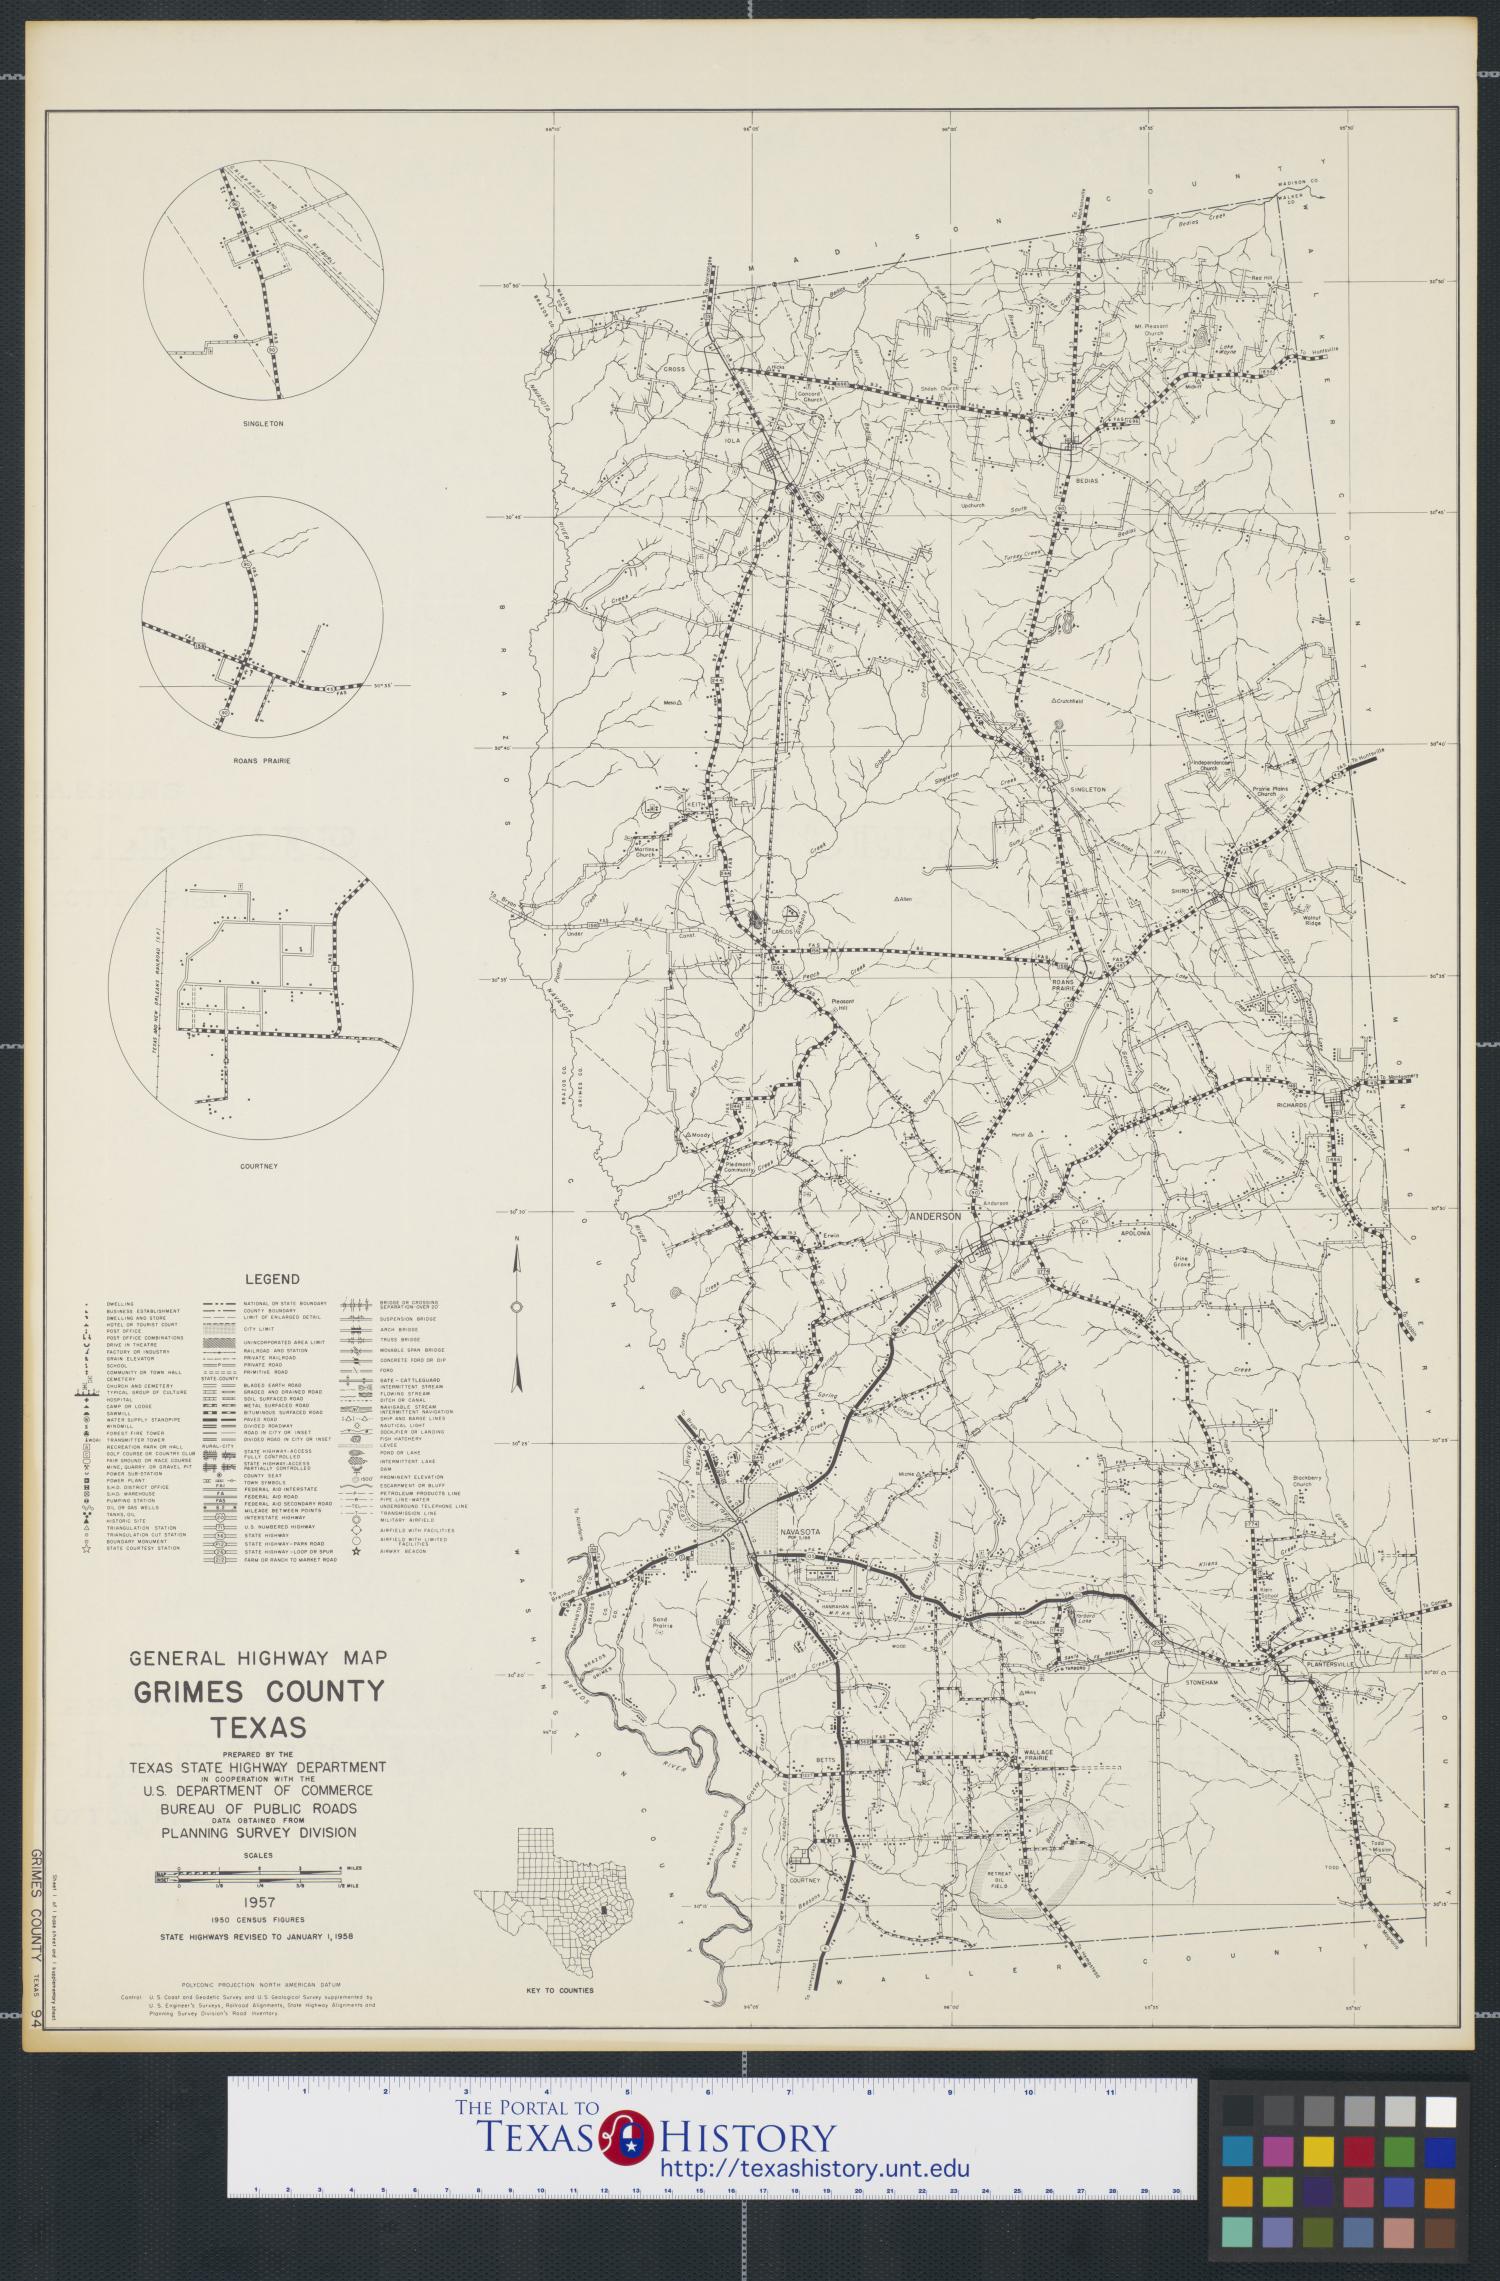 General Highway Map Grimes County Texas The Portal To Texas History